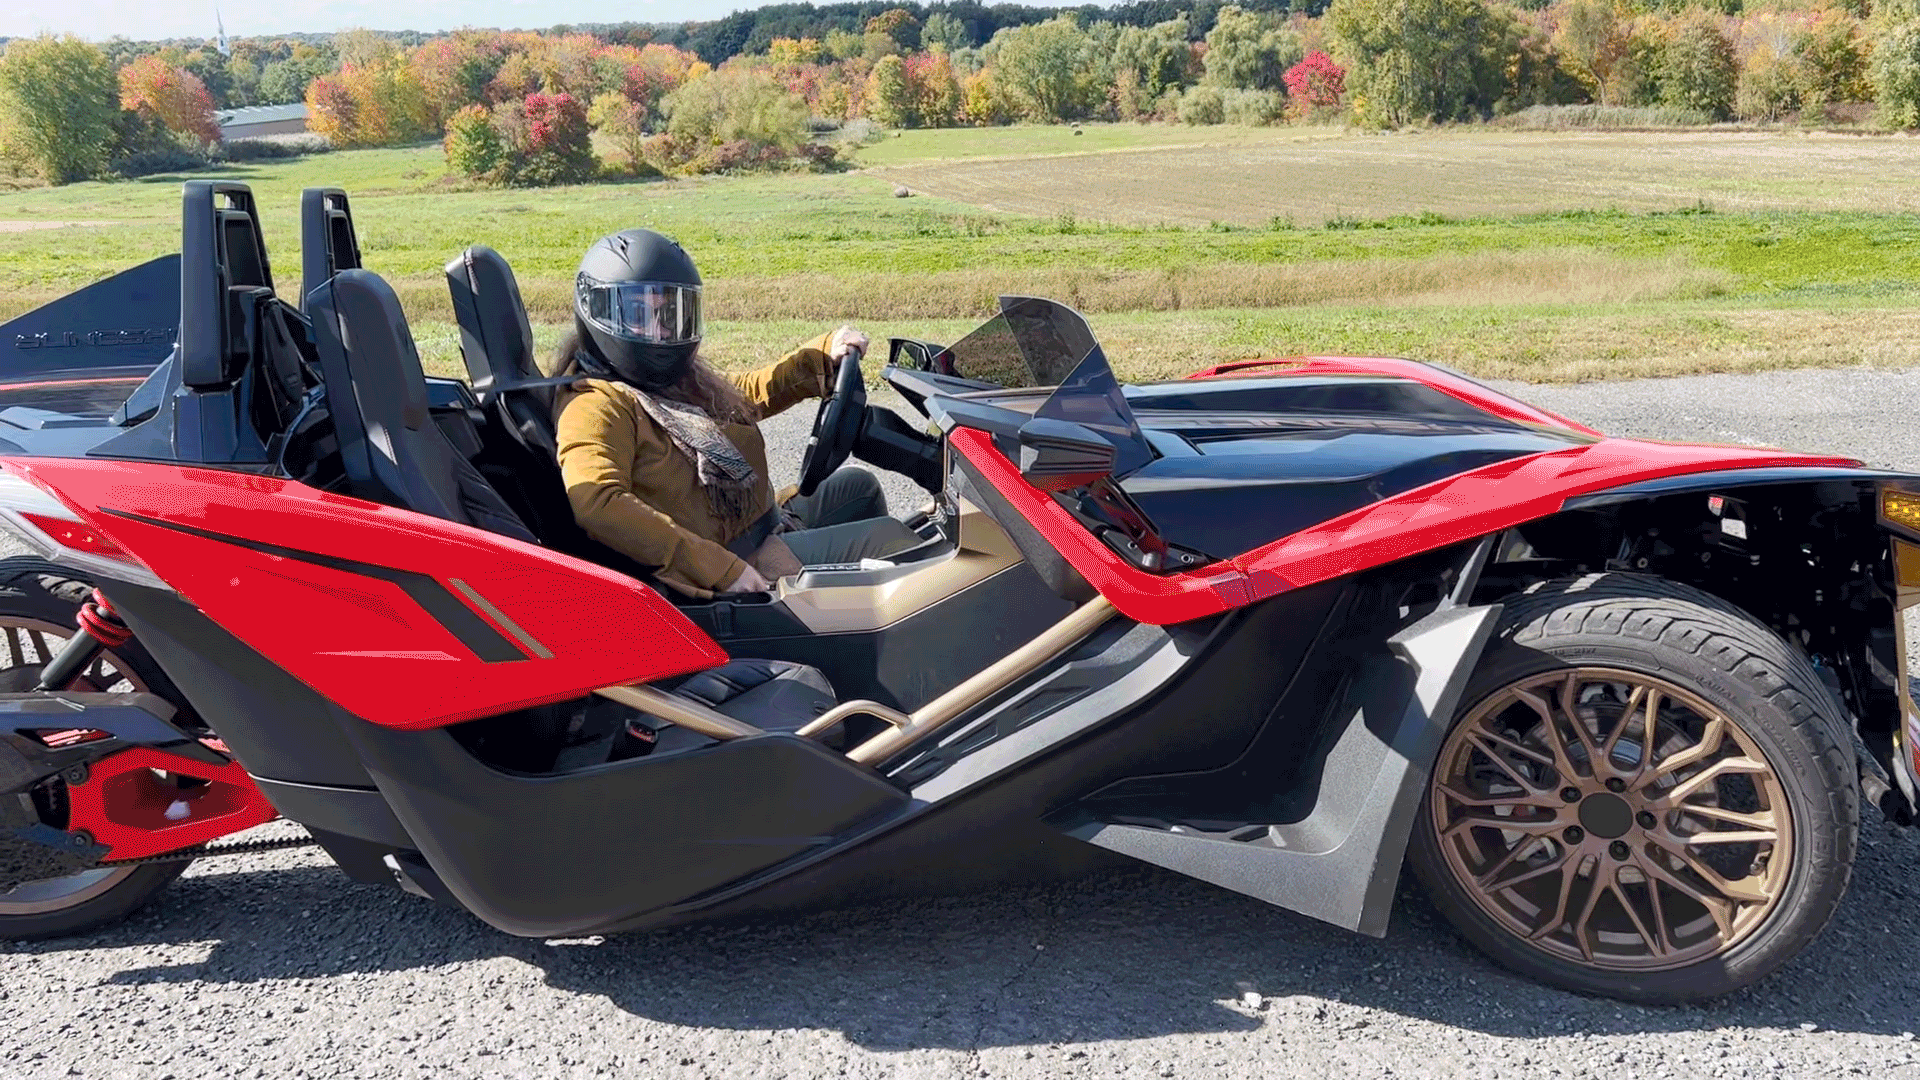 SmarterTravel editor Megan Johnson in the driver's seat of the Polaris Slingshot, giving a thumbs up to the camera